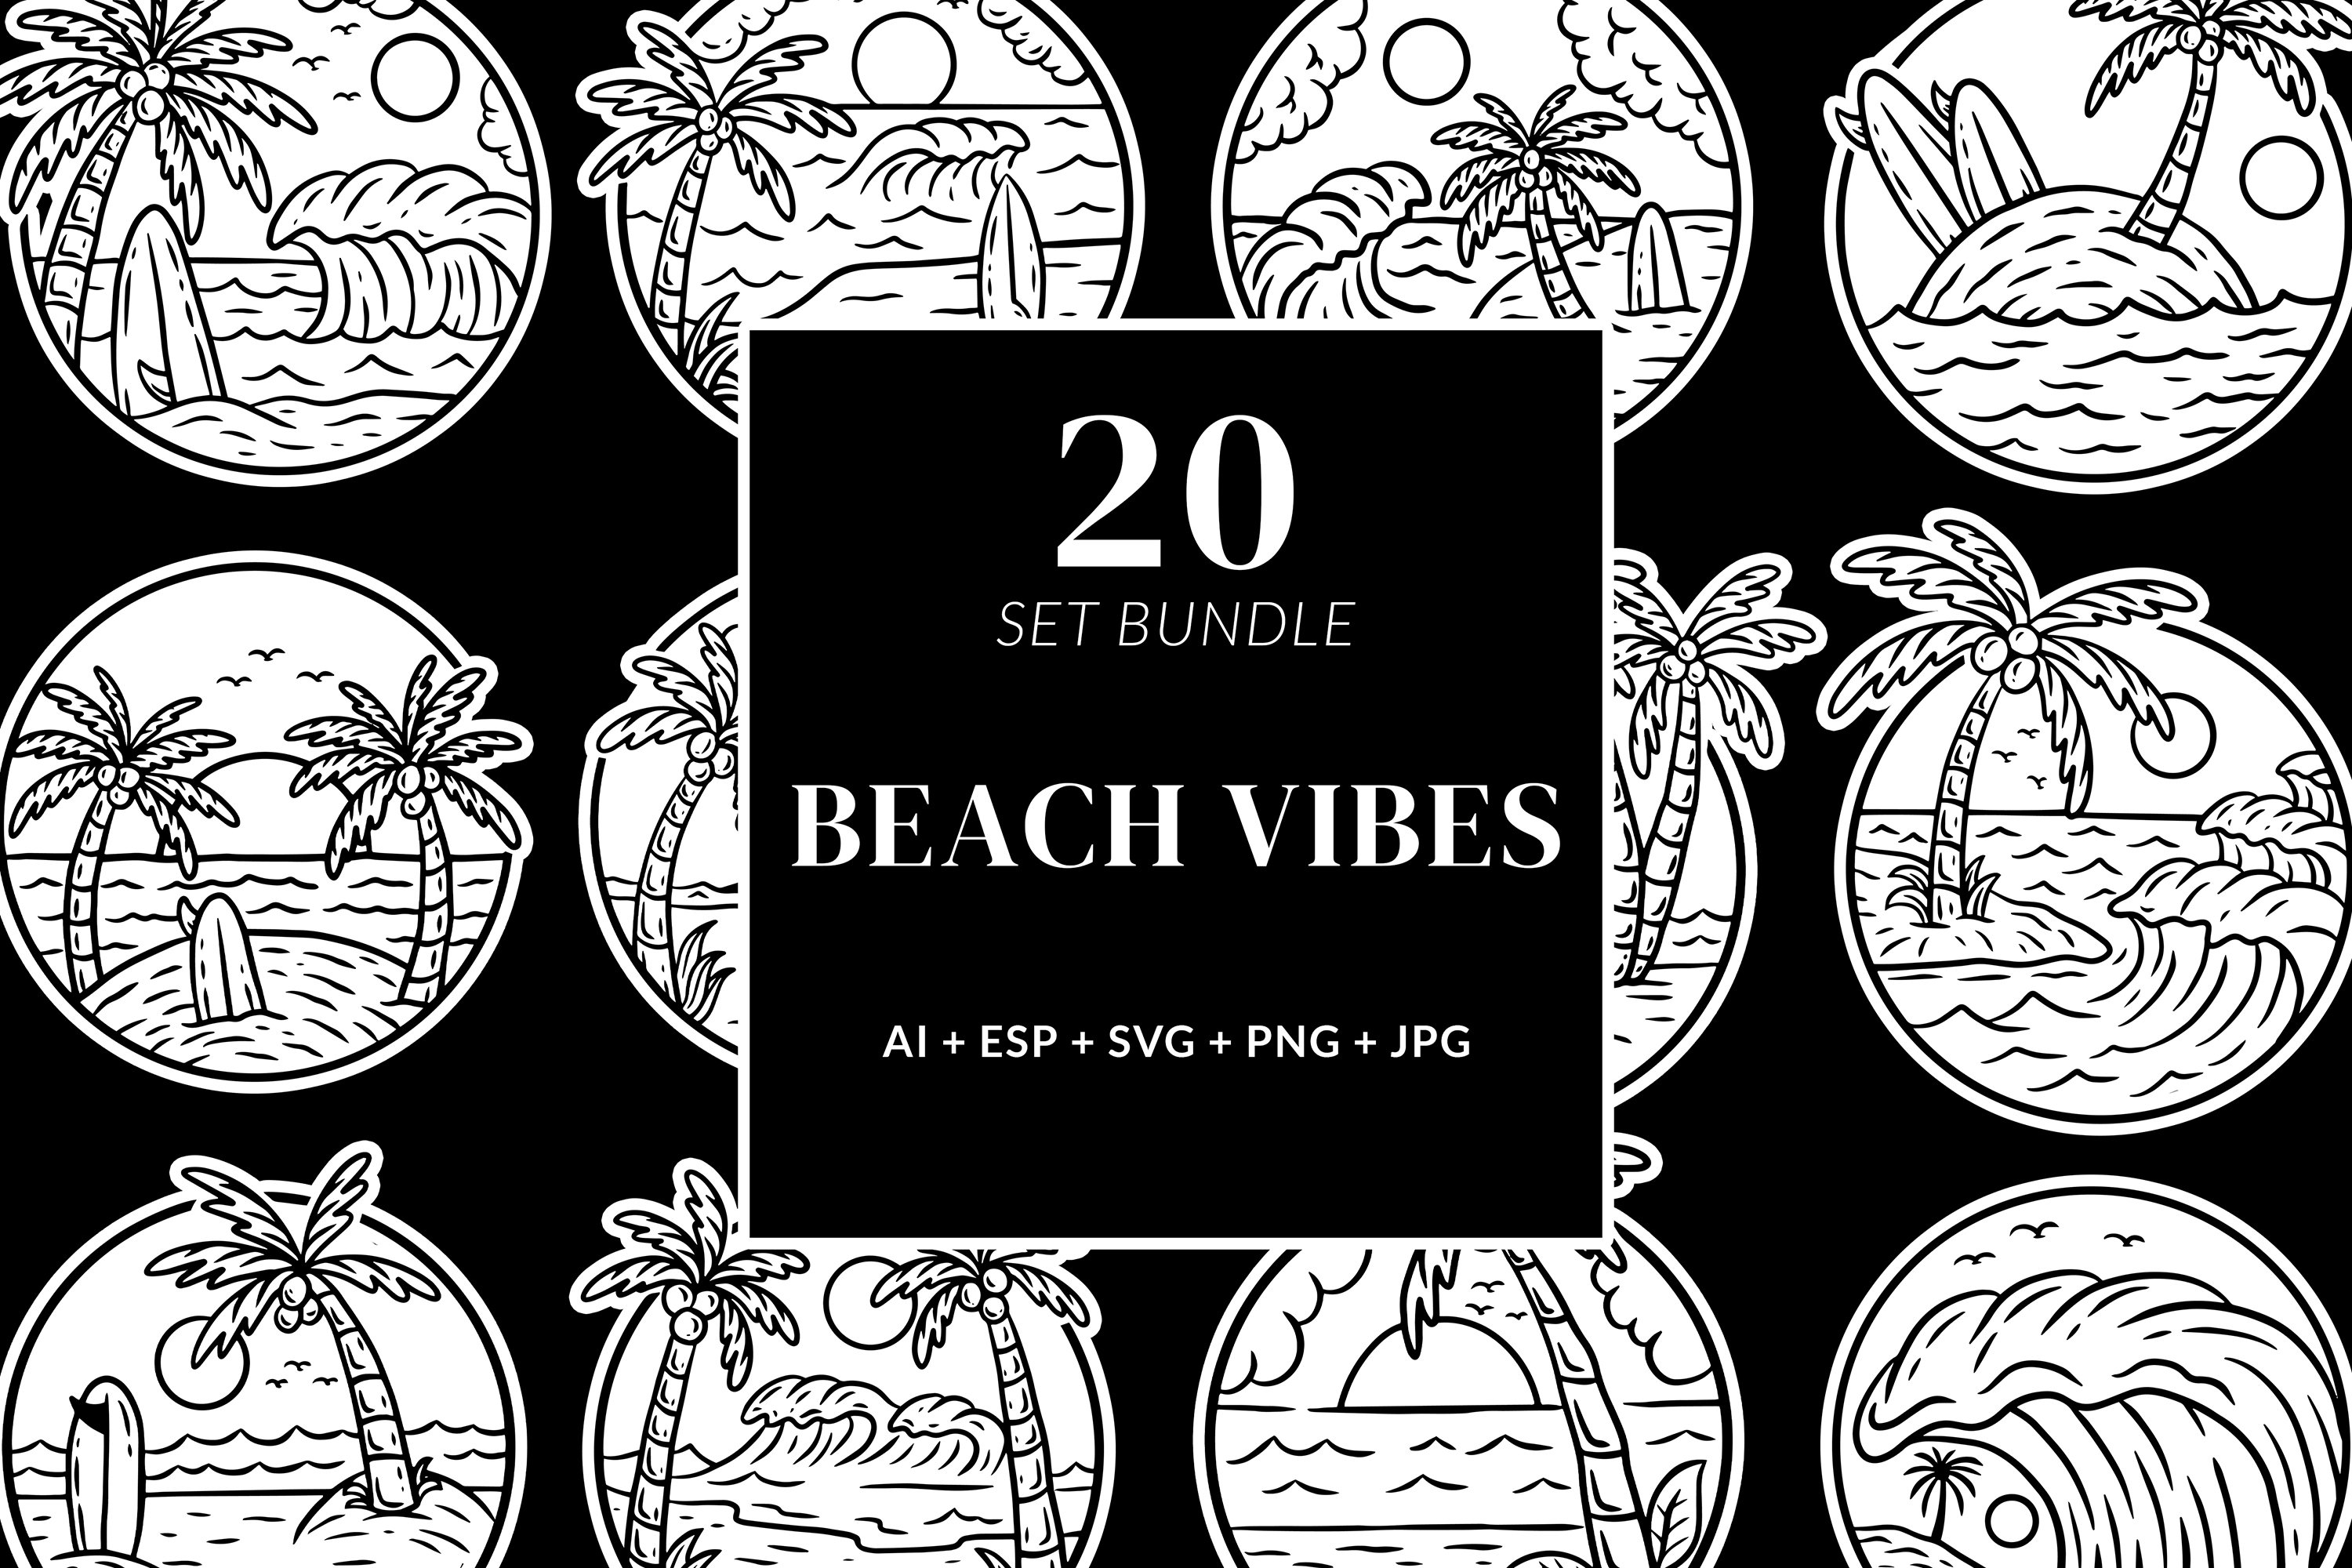 20 Summer Beach Good Vibes Sunset cover image.